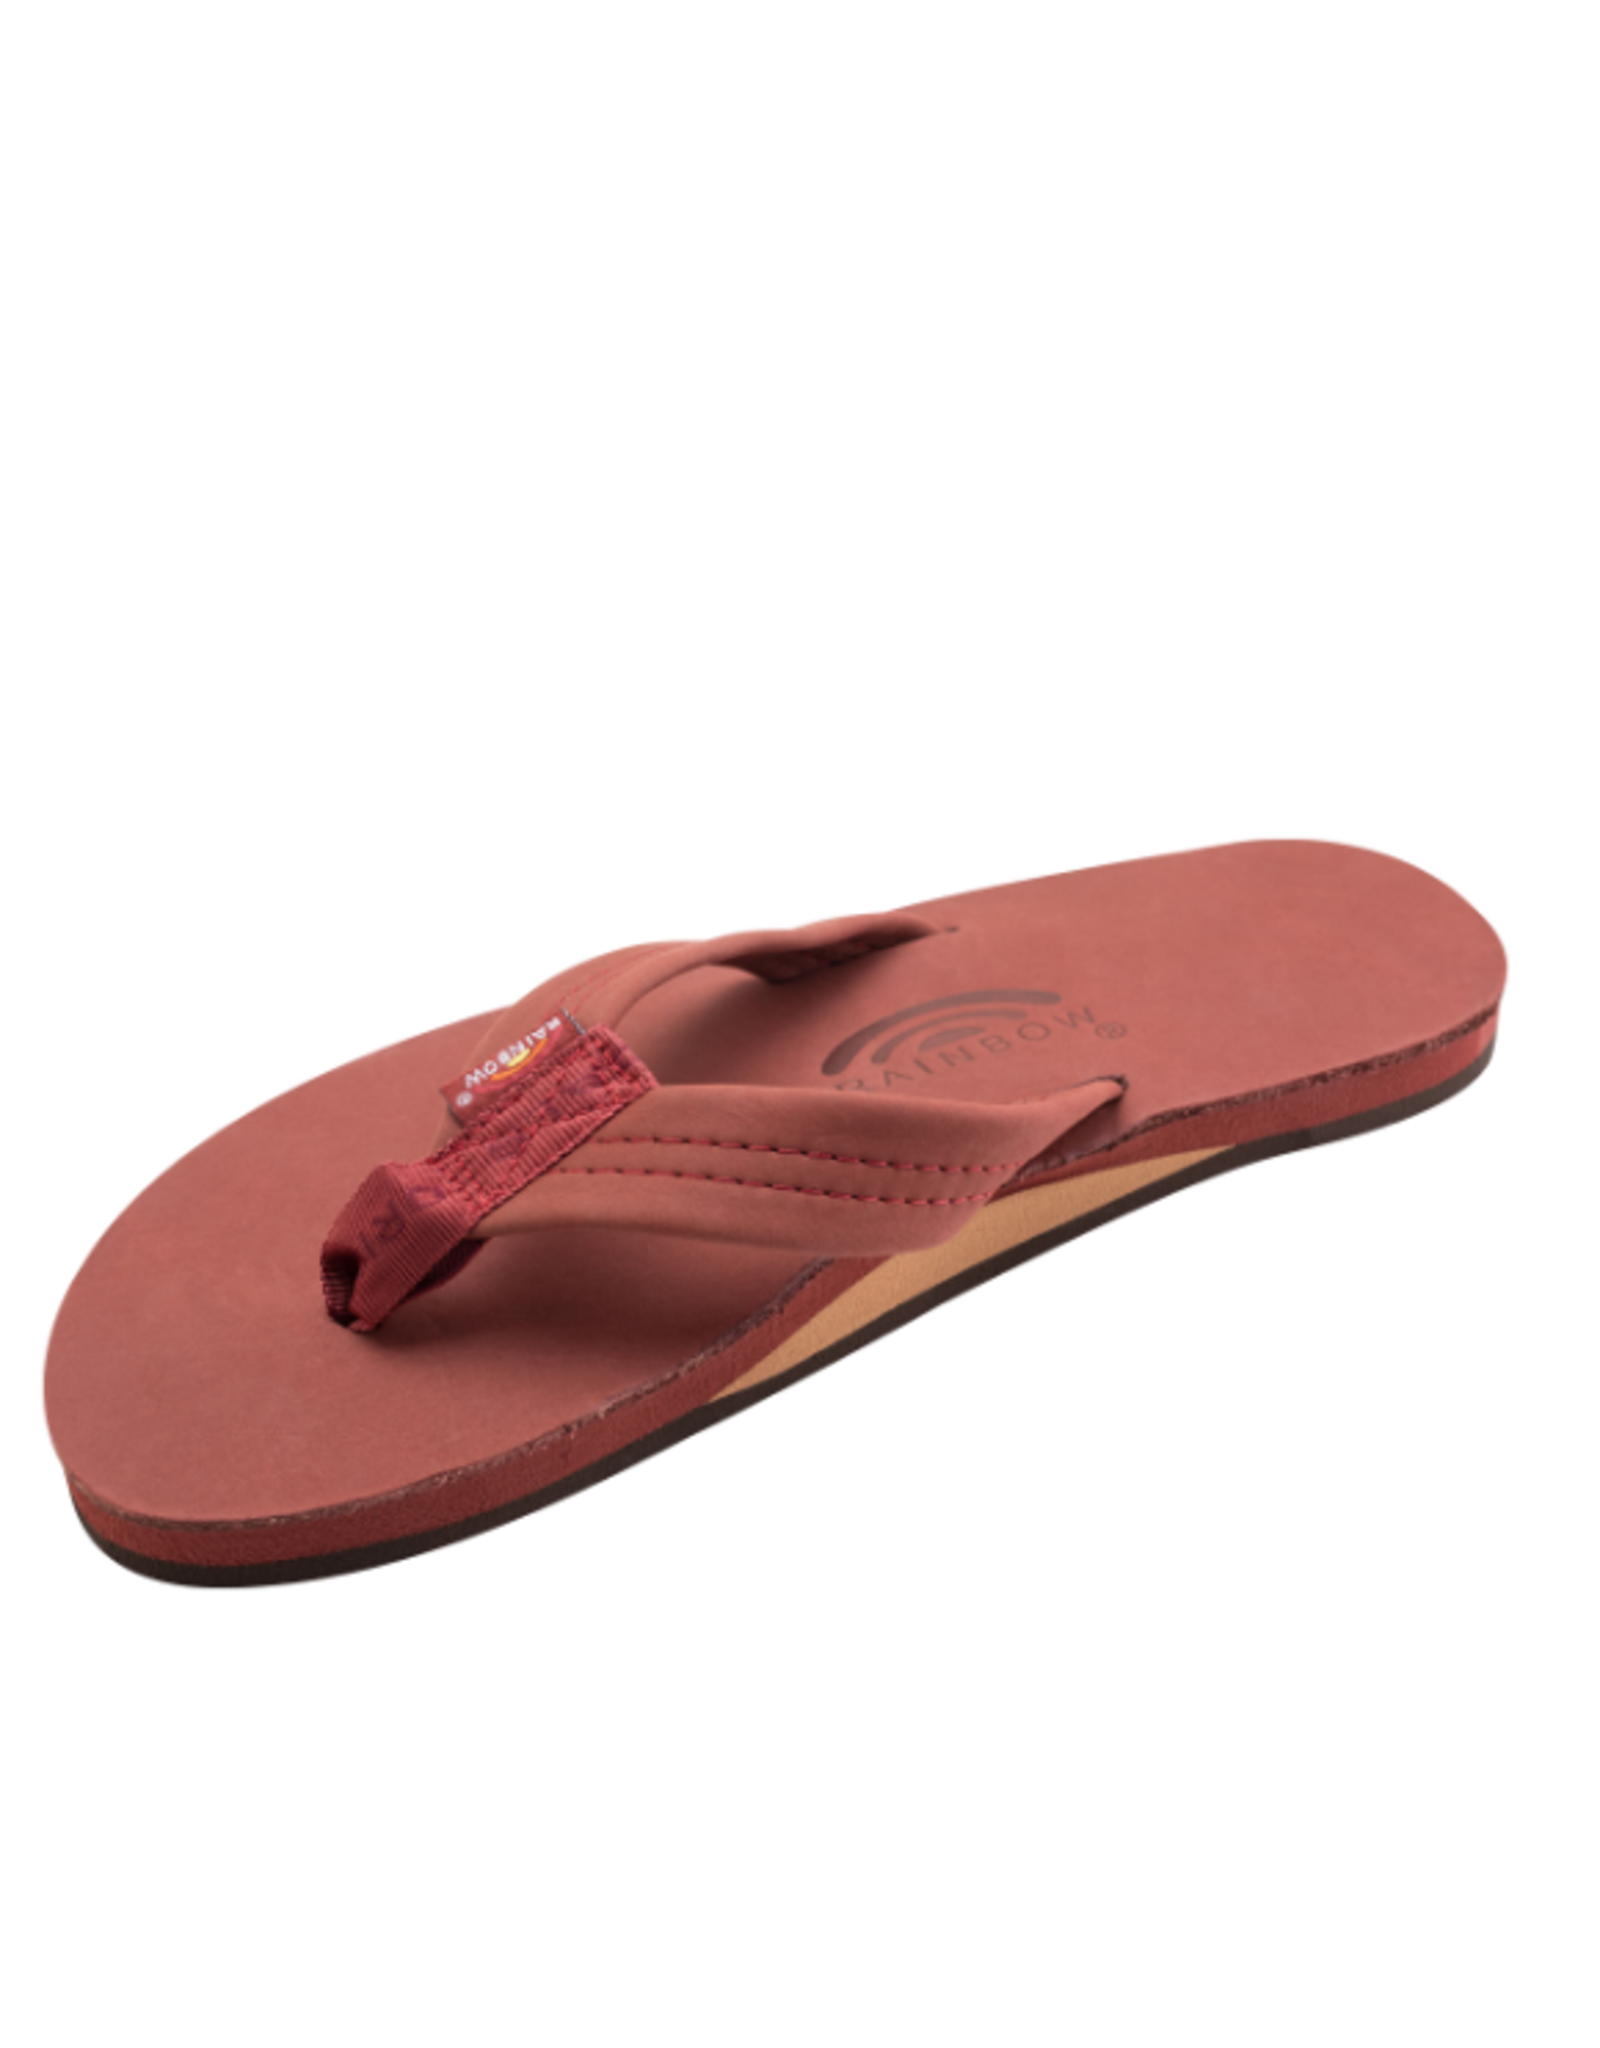 RAINBOW Single Layer Premier Leather with Arch Support 1" Strap